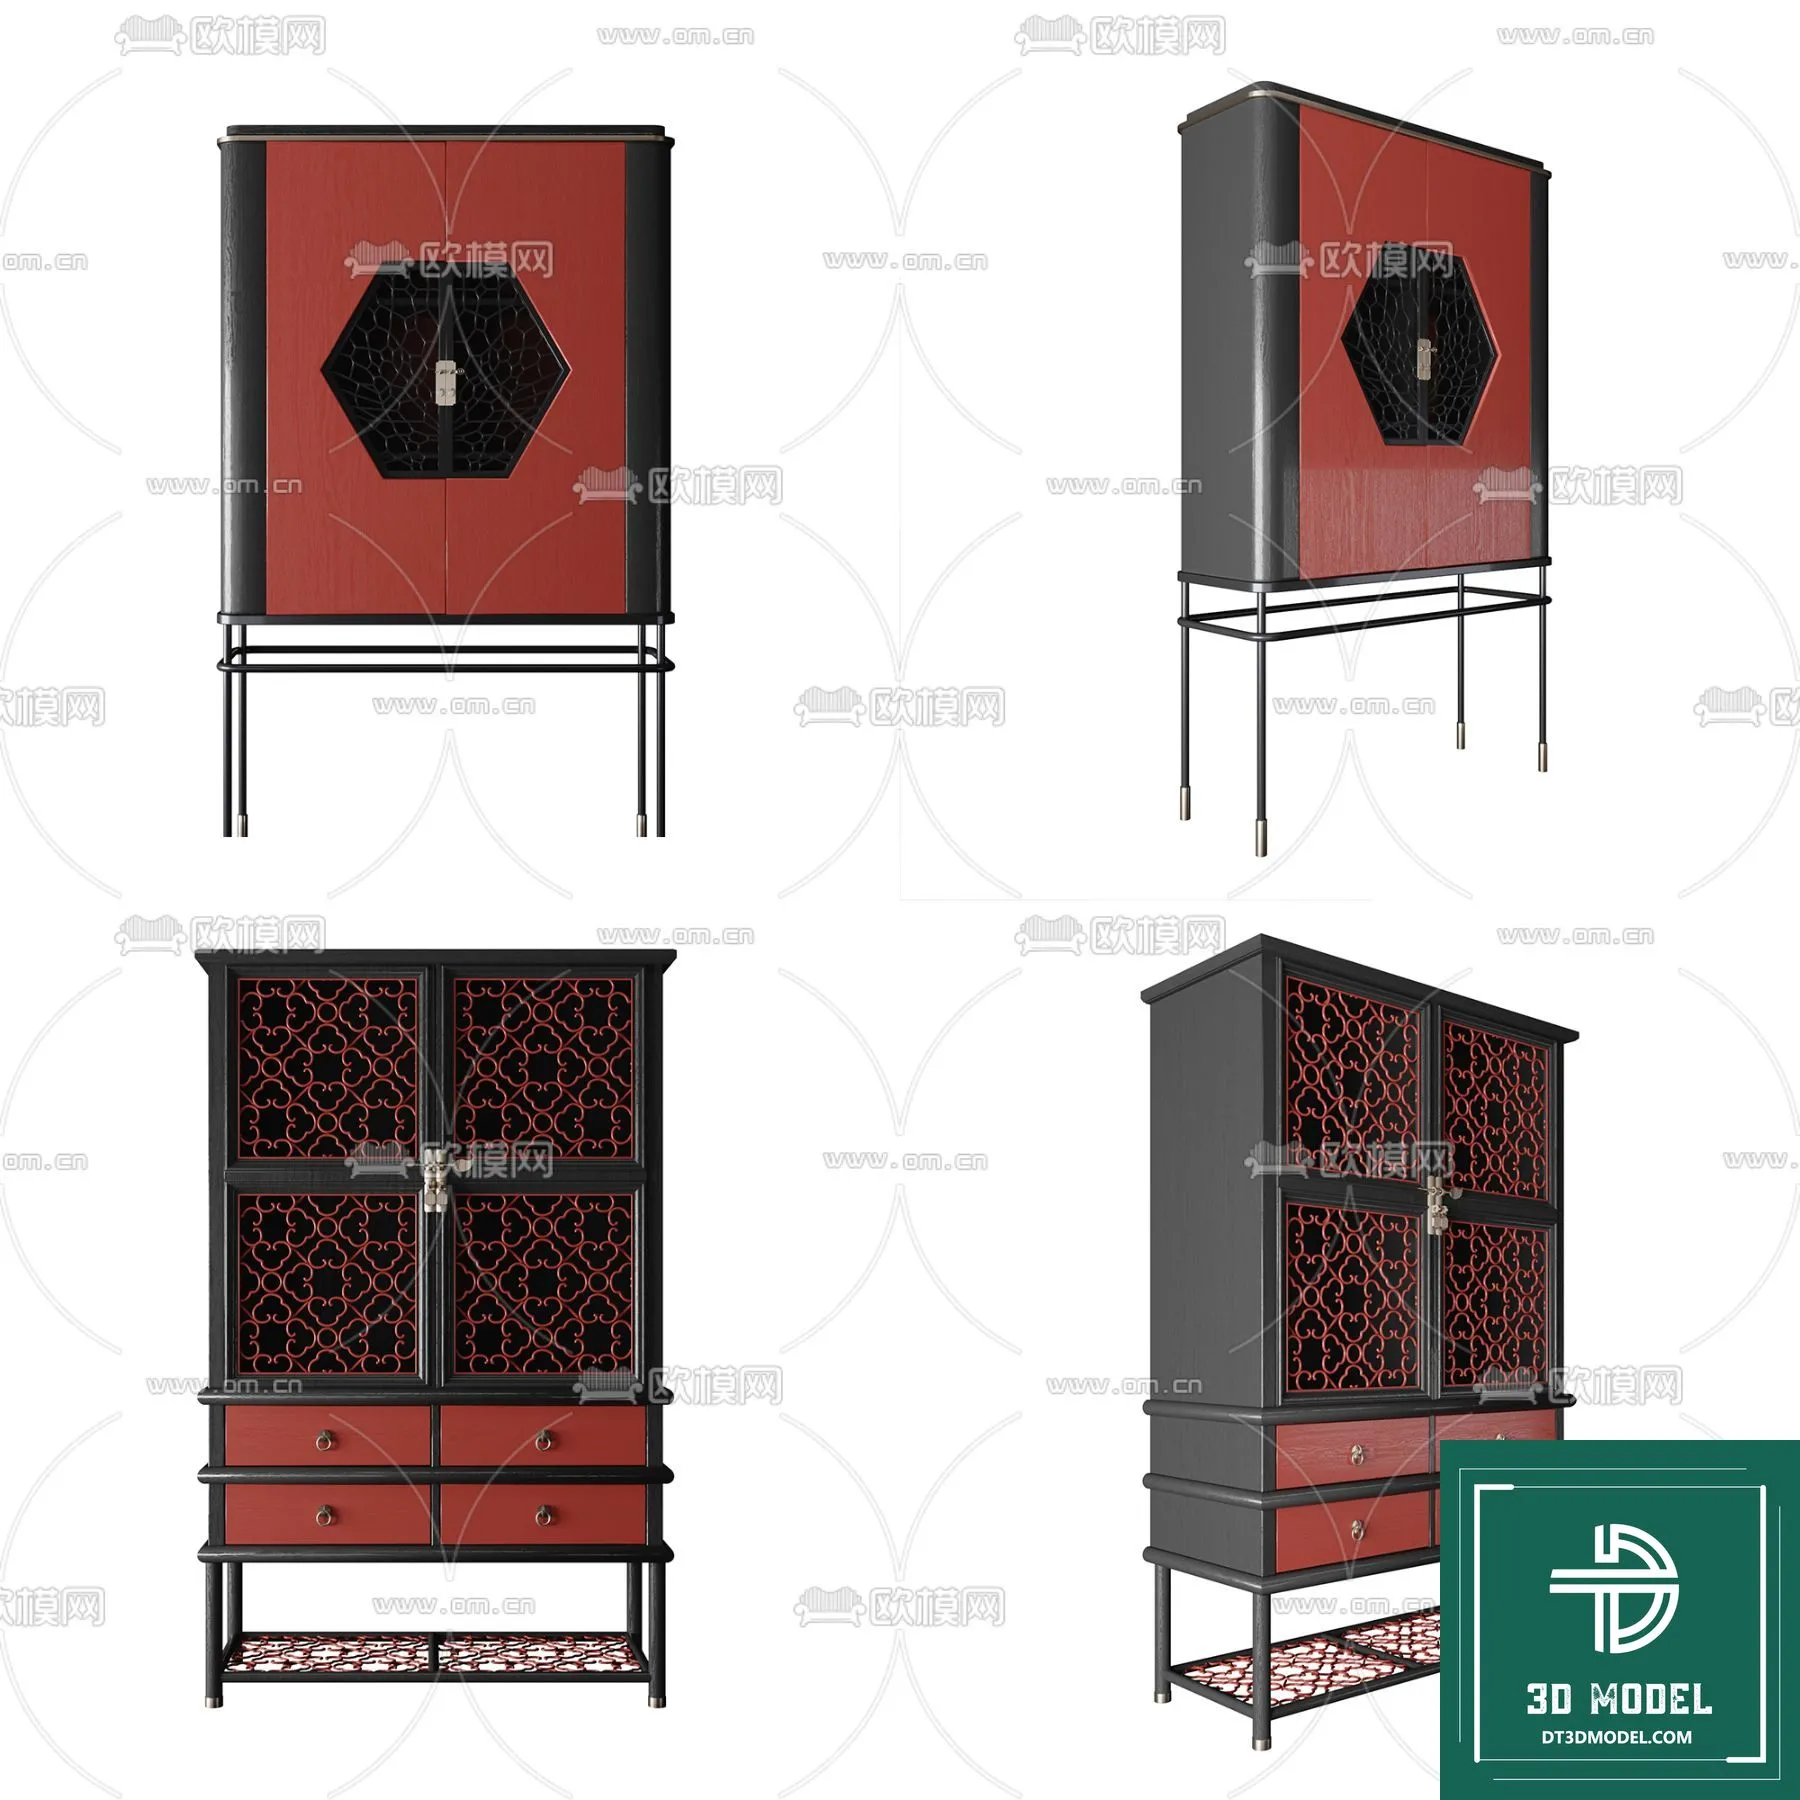 INDOCHINE STYLE – 3D MODELS – 478